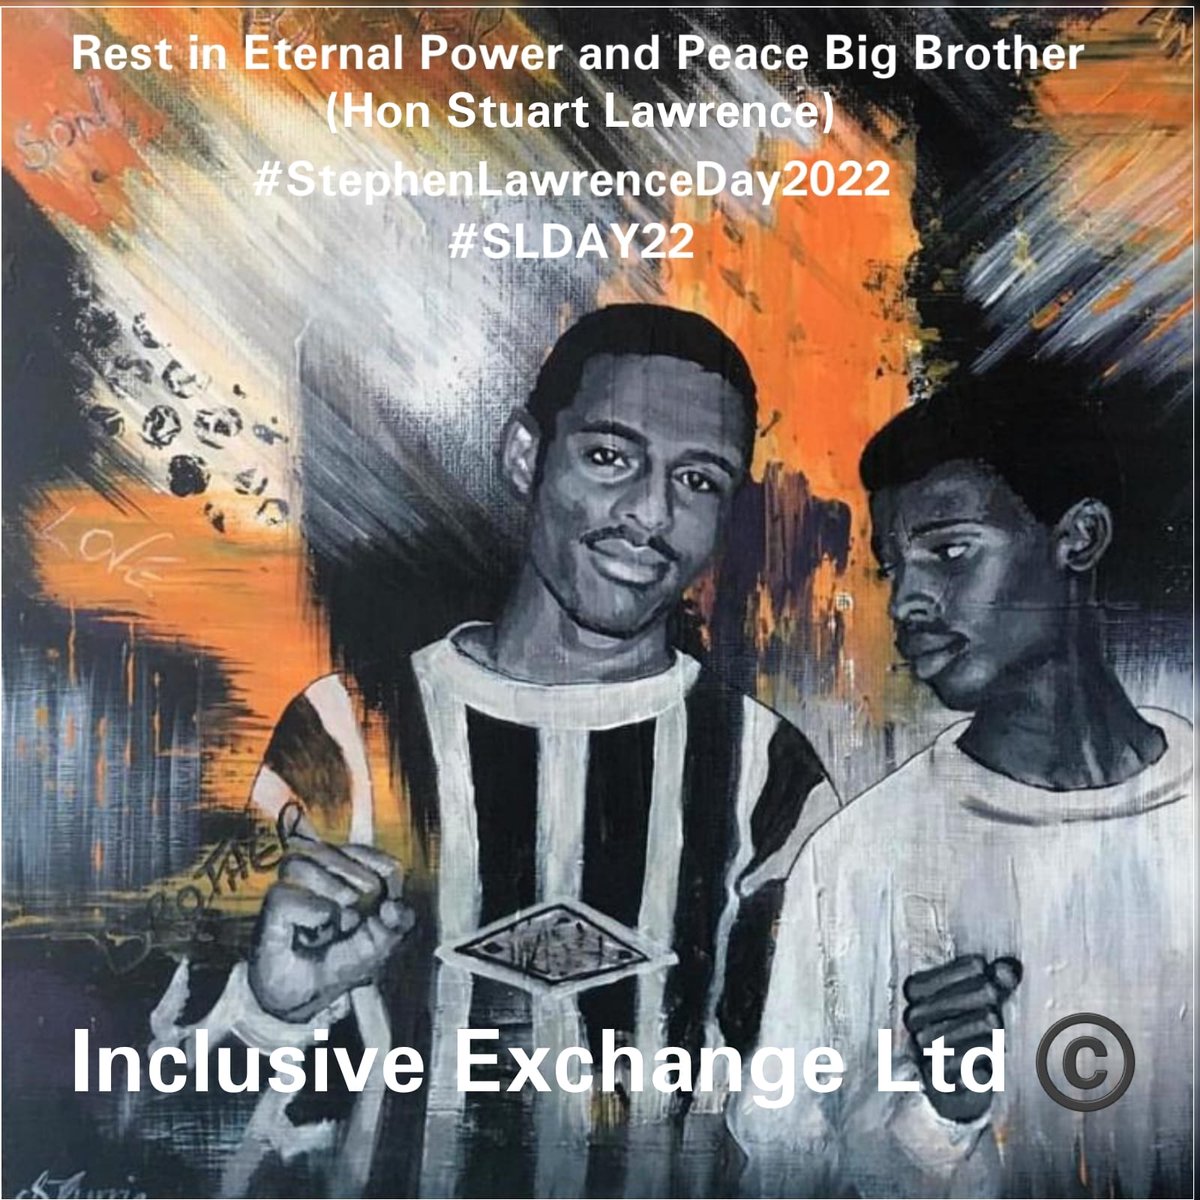 Stephen- Rest In Eternal Power @sal2nd 29 years ago today I lost my big brother in an unprovoked racist attack in London. May his legacy continue to impact the lives of others & help towards a fairer society #StephenLawrenceDay2022 #SLDAY22 #StephenLawrence #StephenLawrenceRIEP